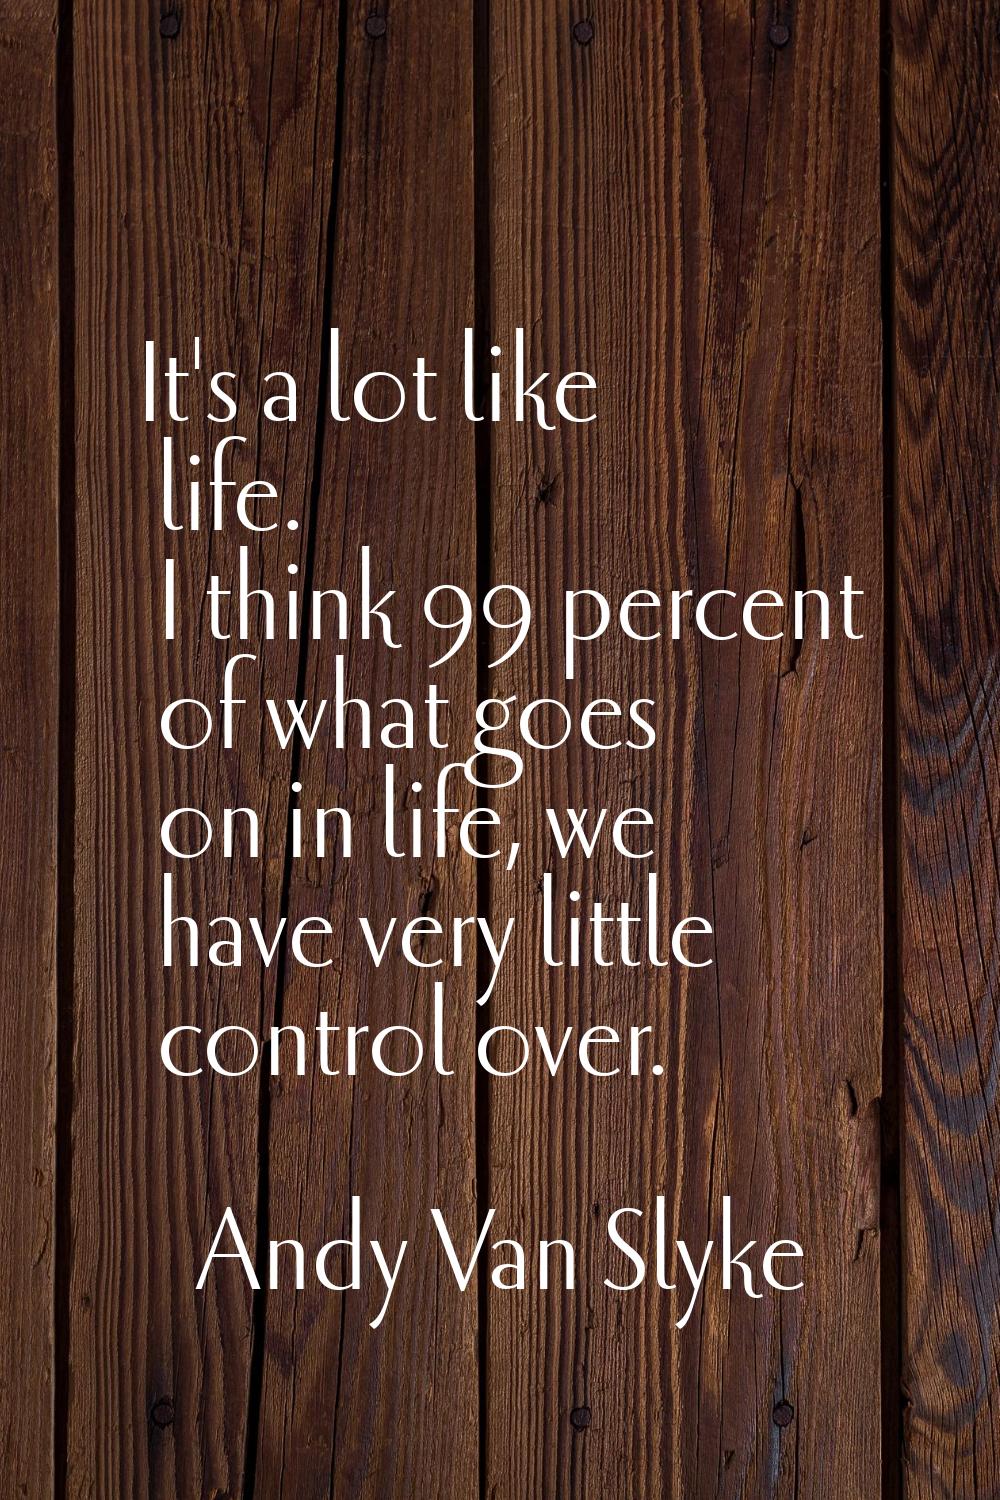 It's a lot like life. I think 99 percent of what goes on in life, we have very little control over.